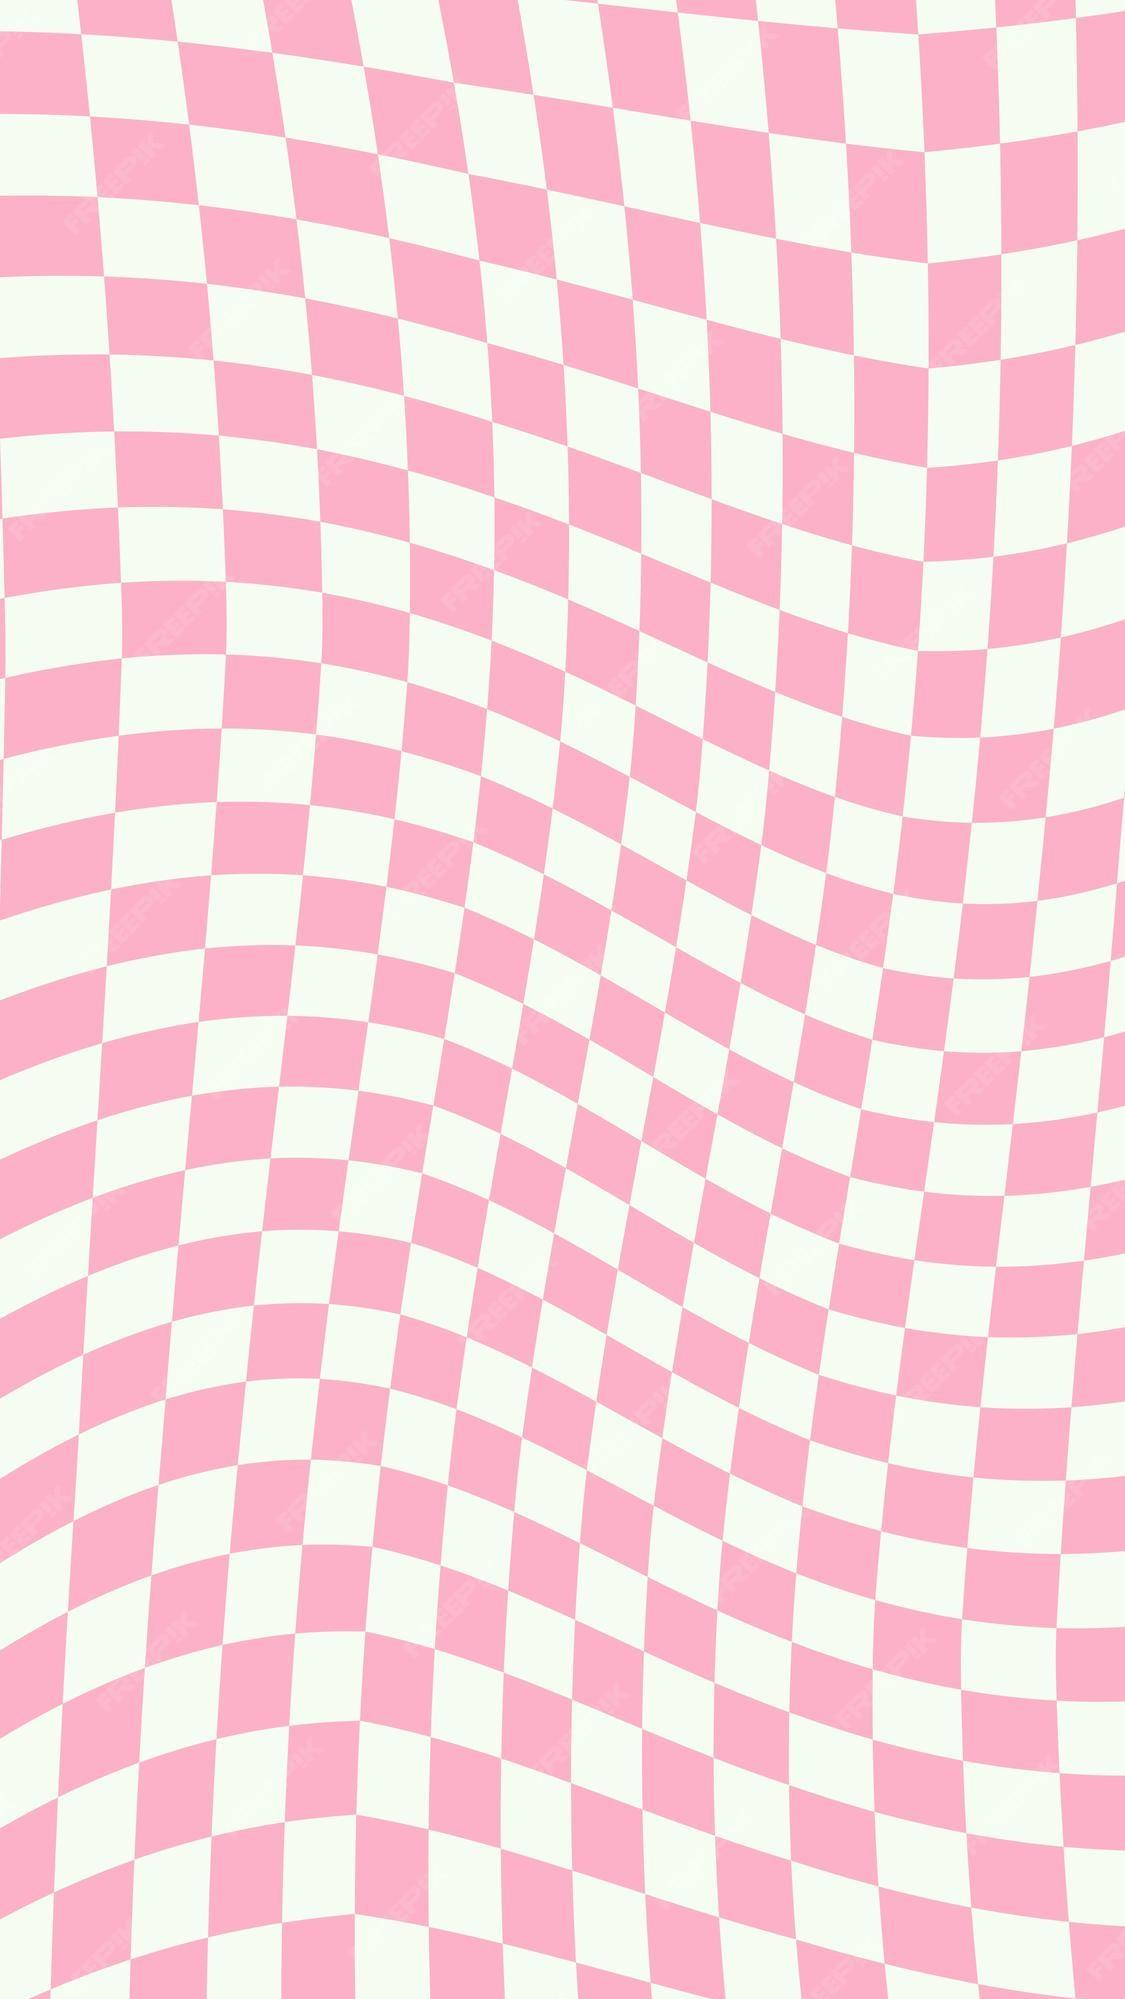 Premium Vector Aesthetic Cute Distorted Vertical Pastel Pink And